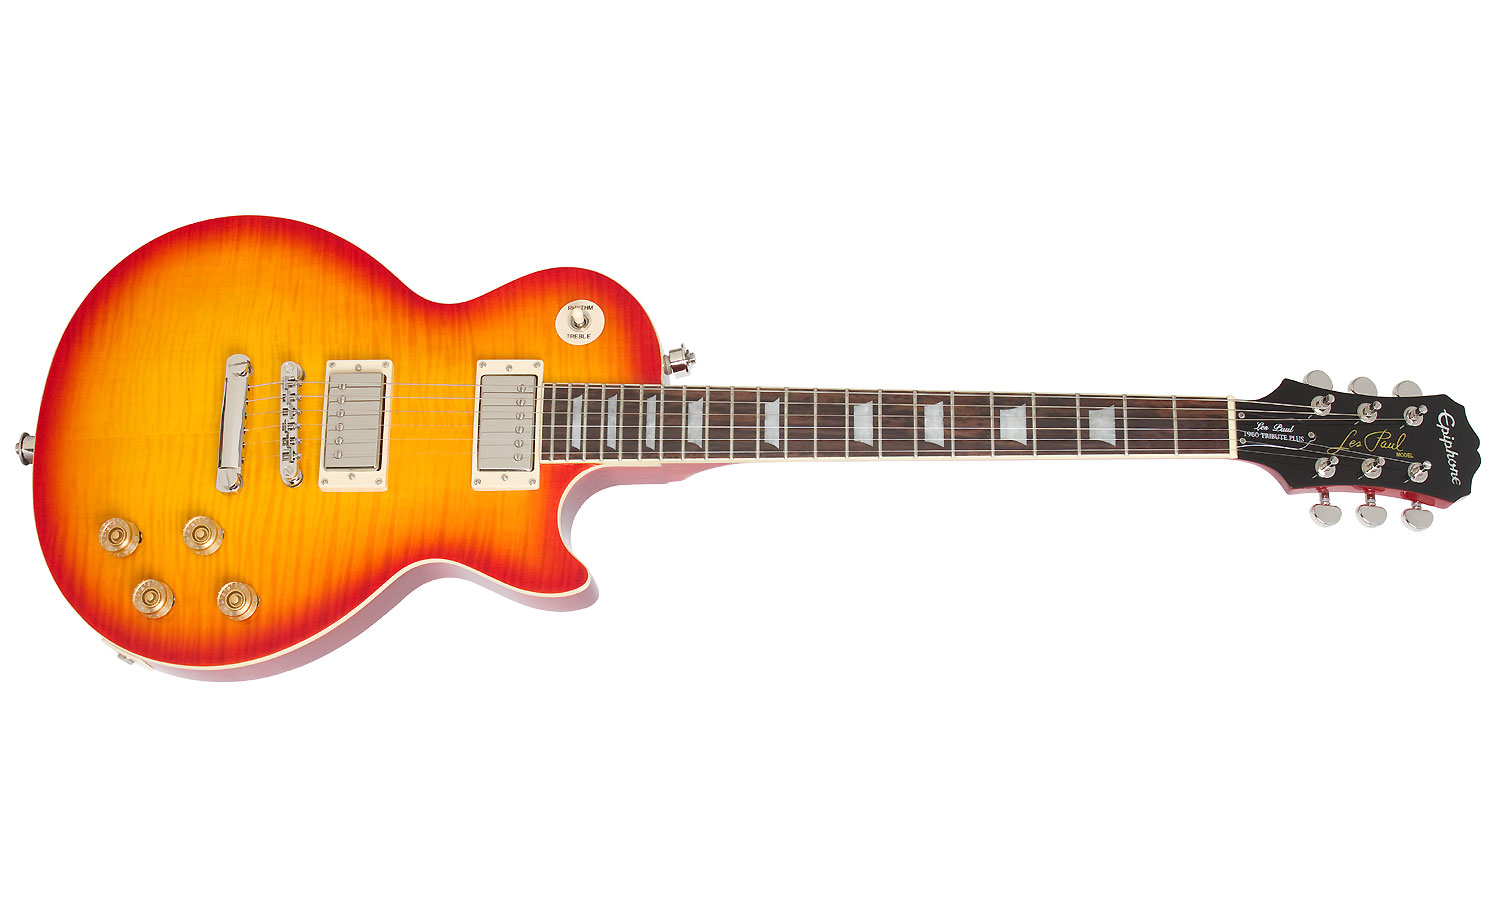 Epiphone Les Paul Tribute Plus Outfit Ch - Faded Cherry - Single cut electric guitar - Variation 1